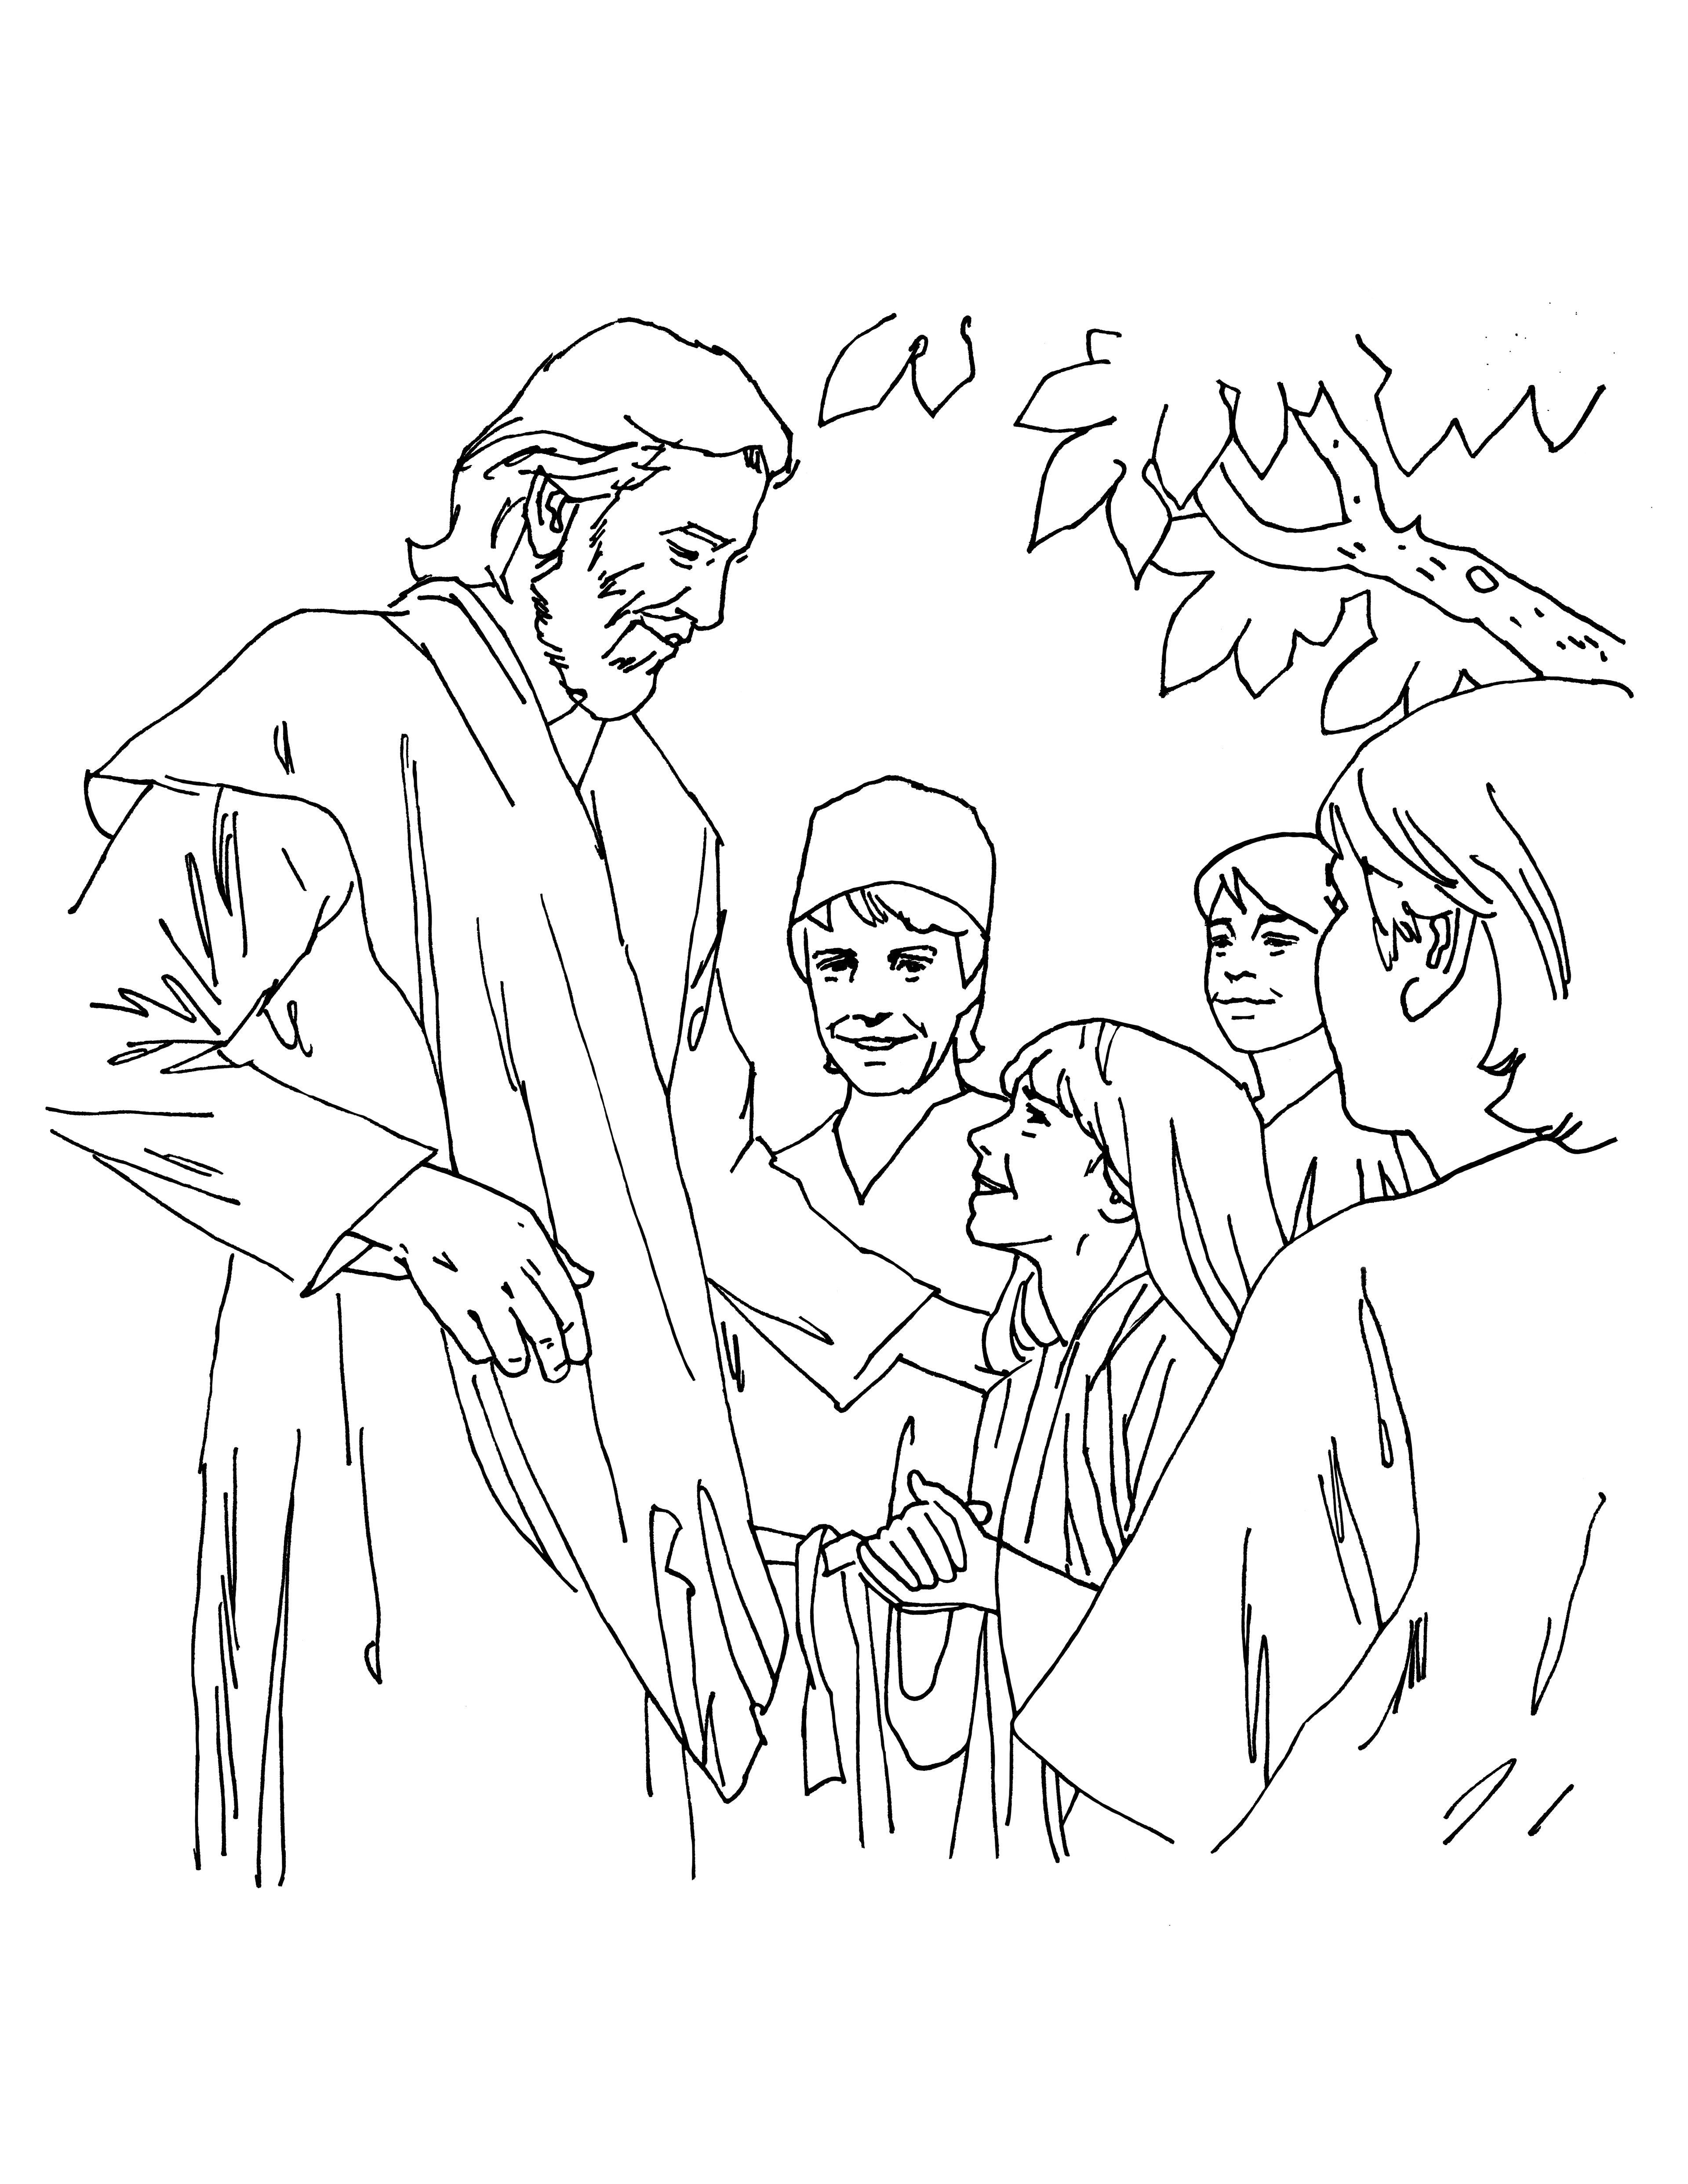 Jesus Christ speaks with a group of children.